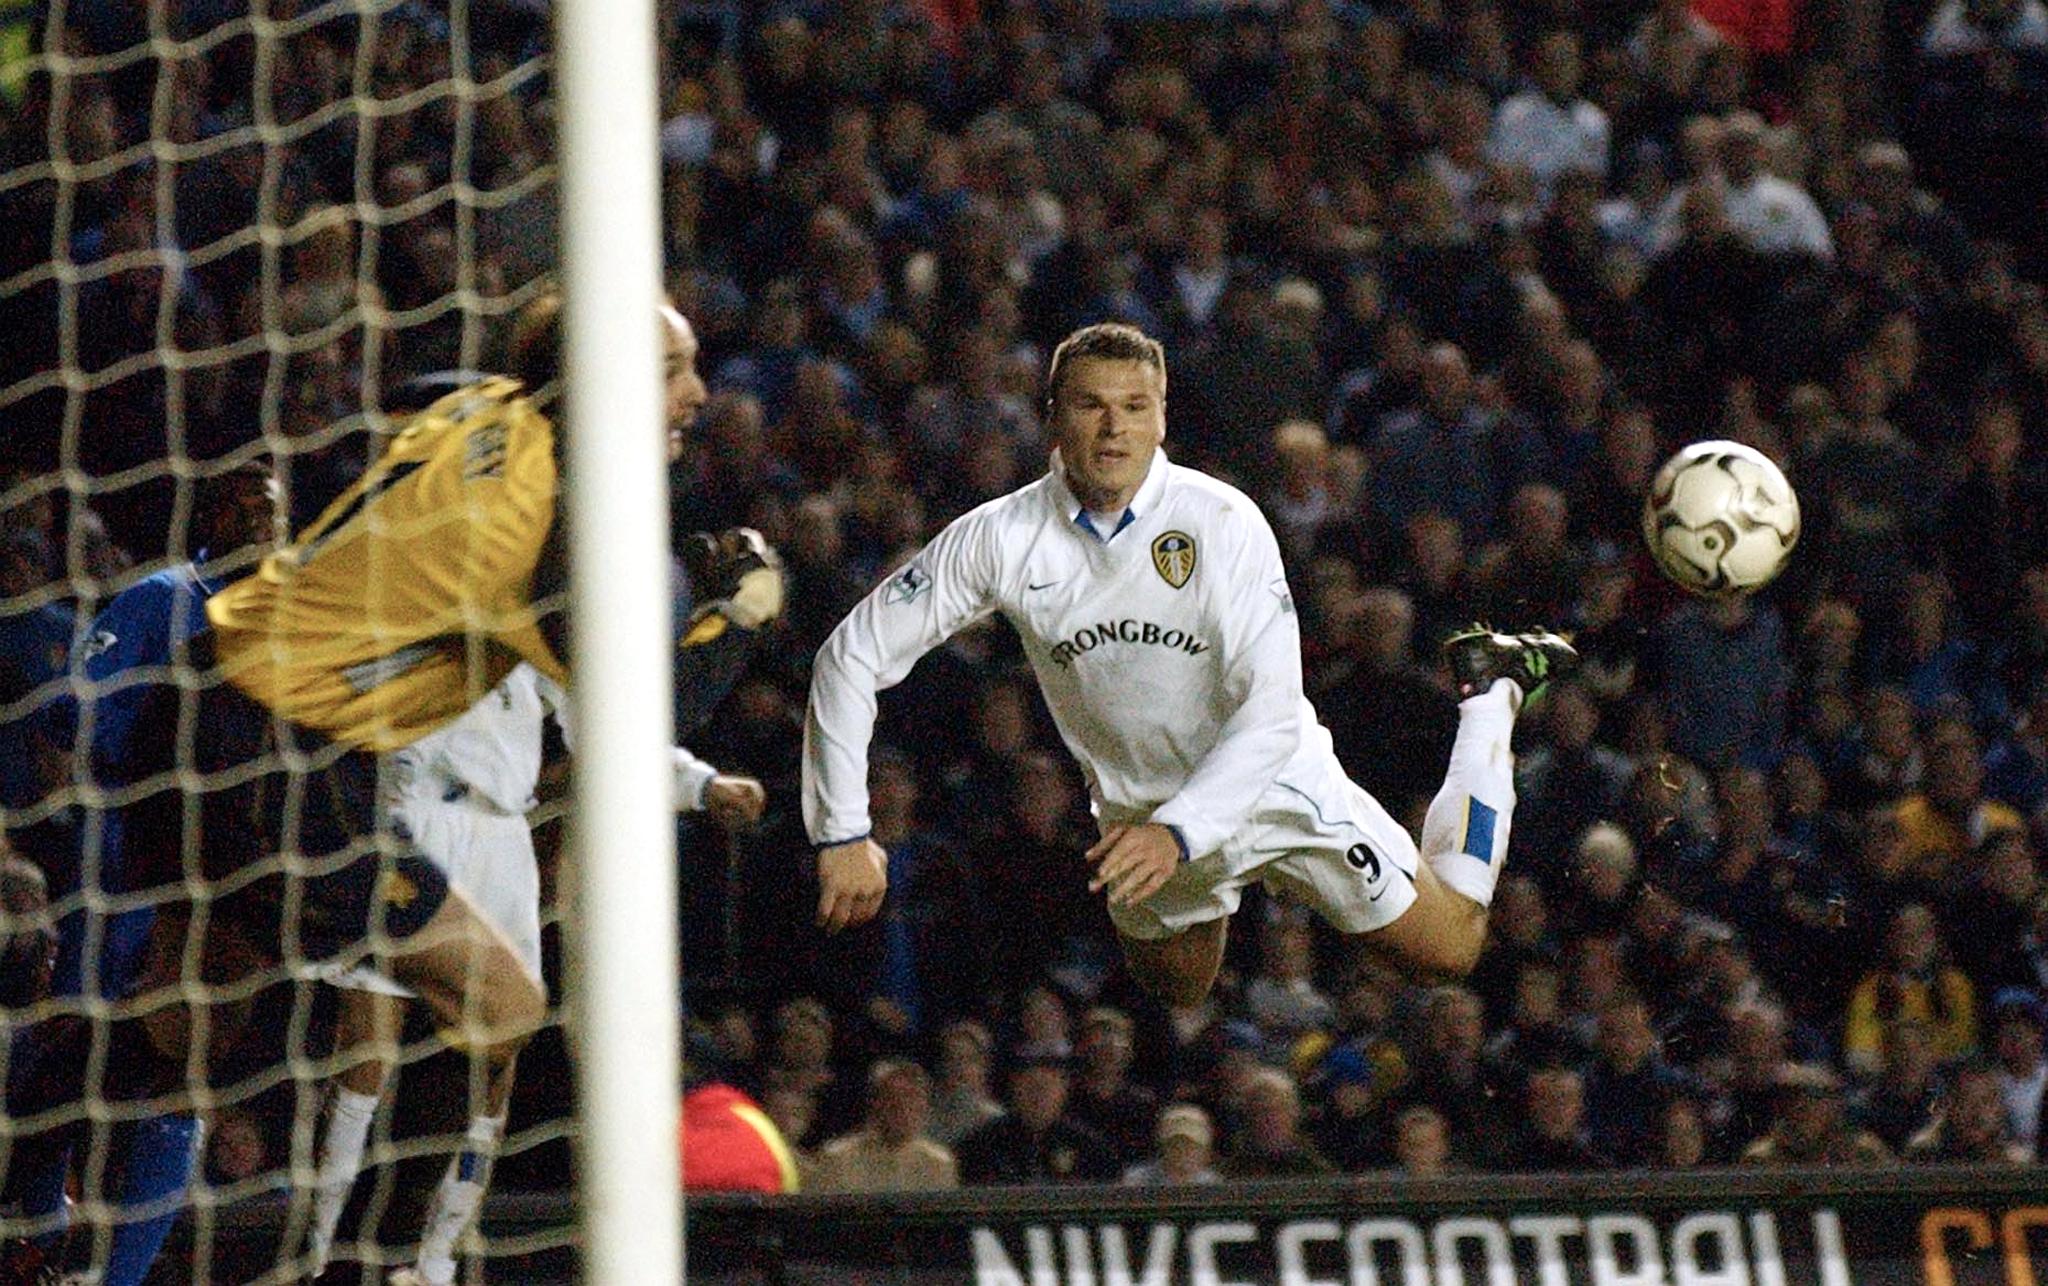 Leeds United Mark Viduka dives to head the ball against Chelsea during their Premiereship clash at Elland Rd in Leeds 28 December 2002. AFP PHOTO Paul Barker / AFP PHOTO / PAUL BARKER